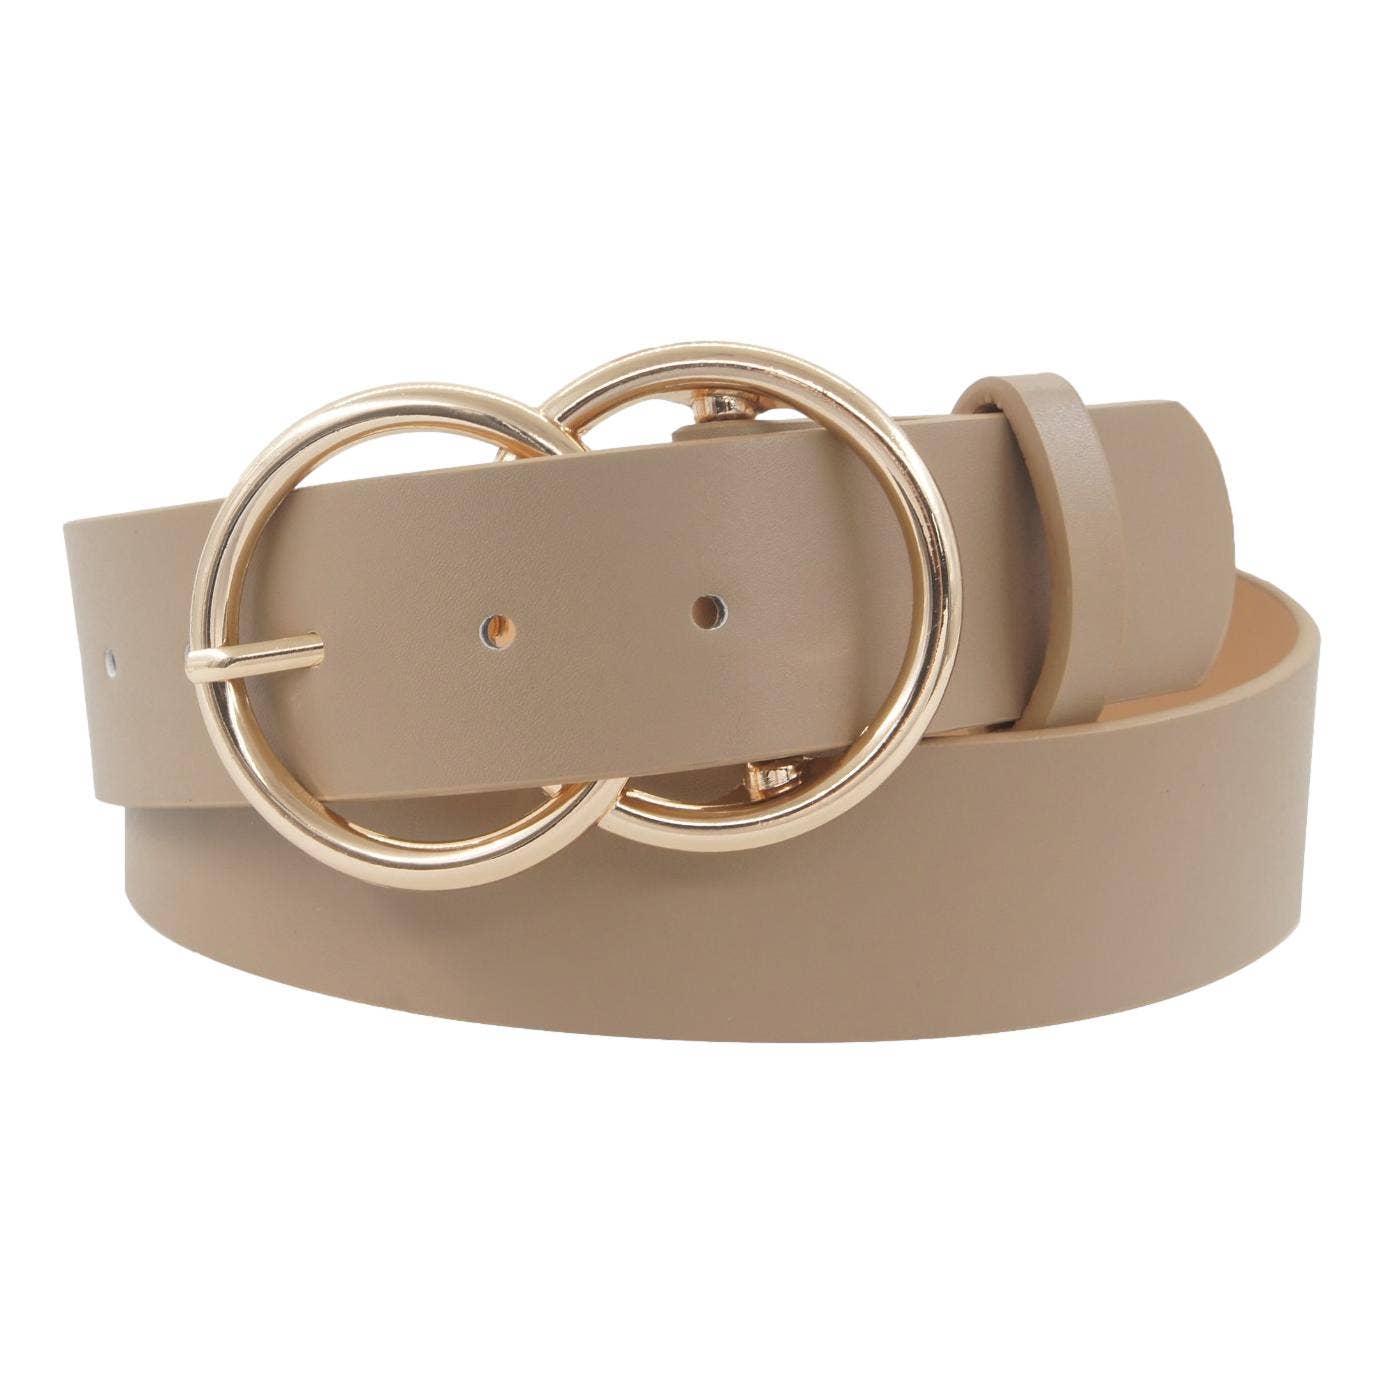 The Datable Double Ring Belt